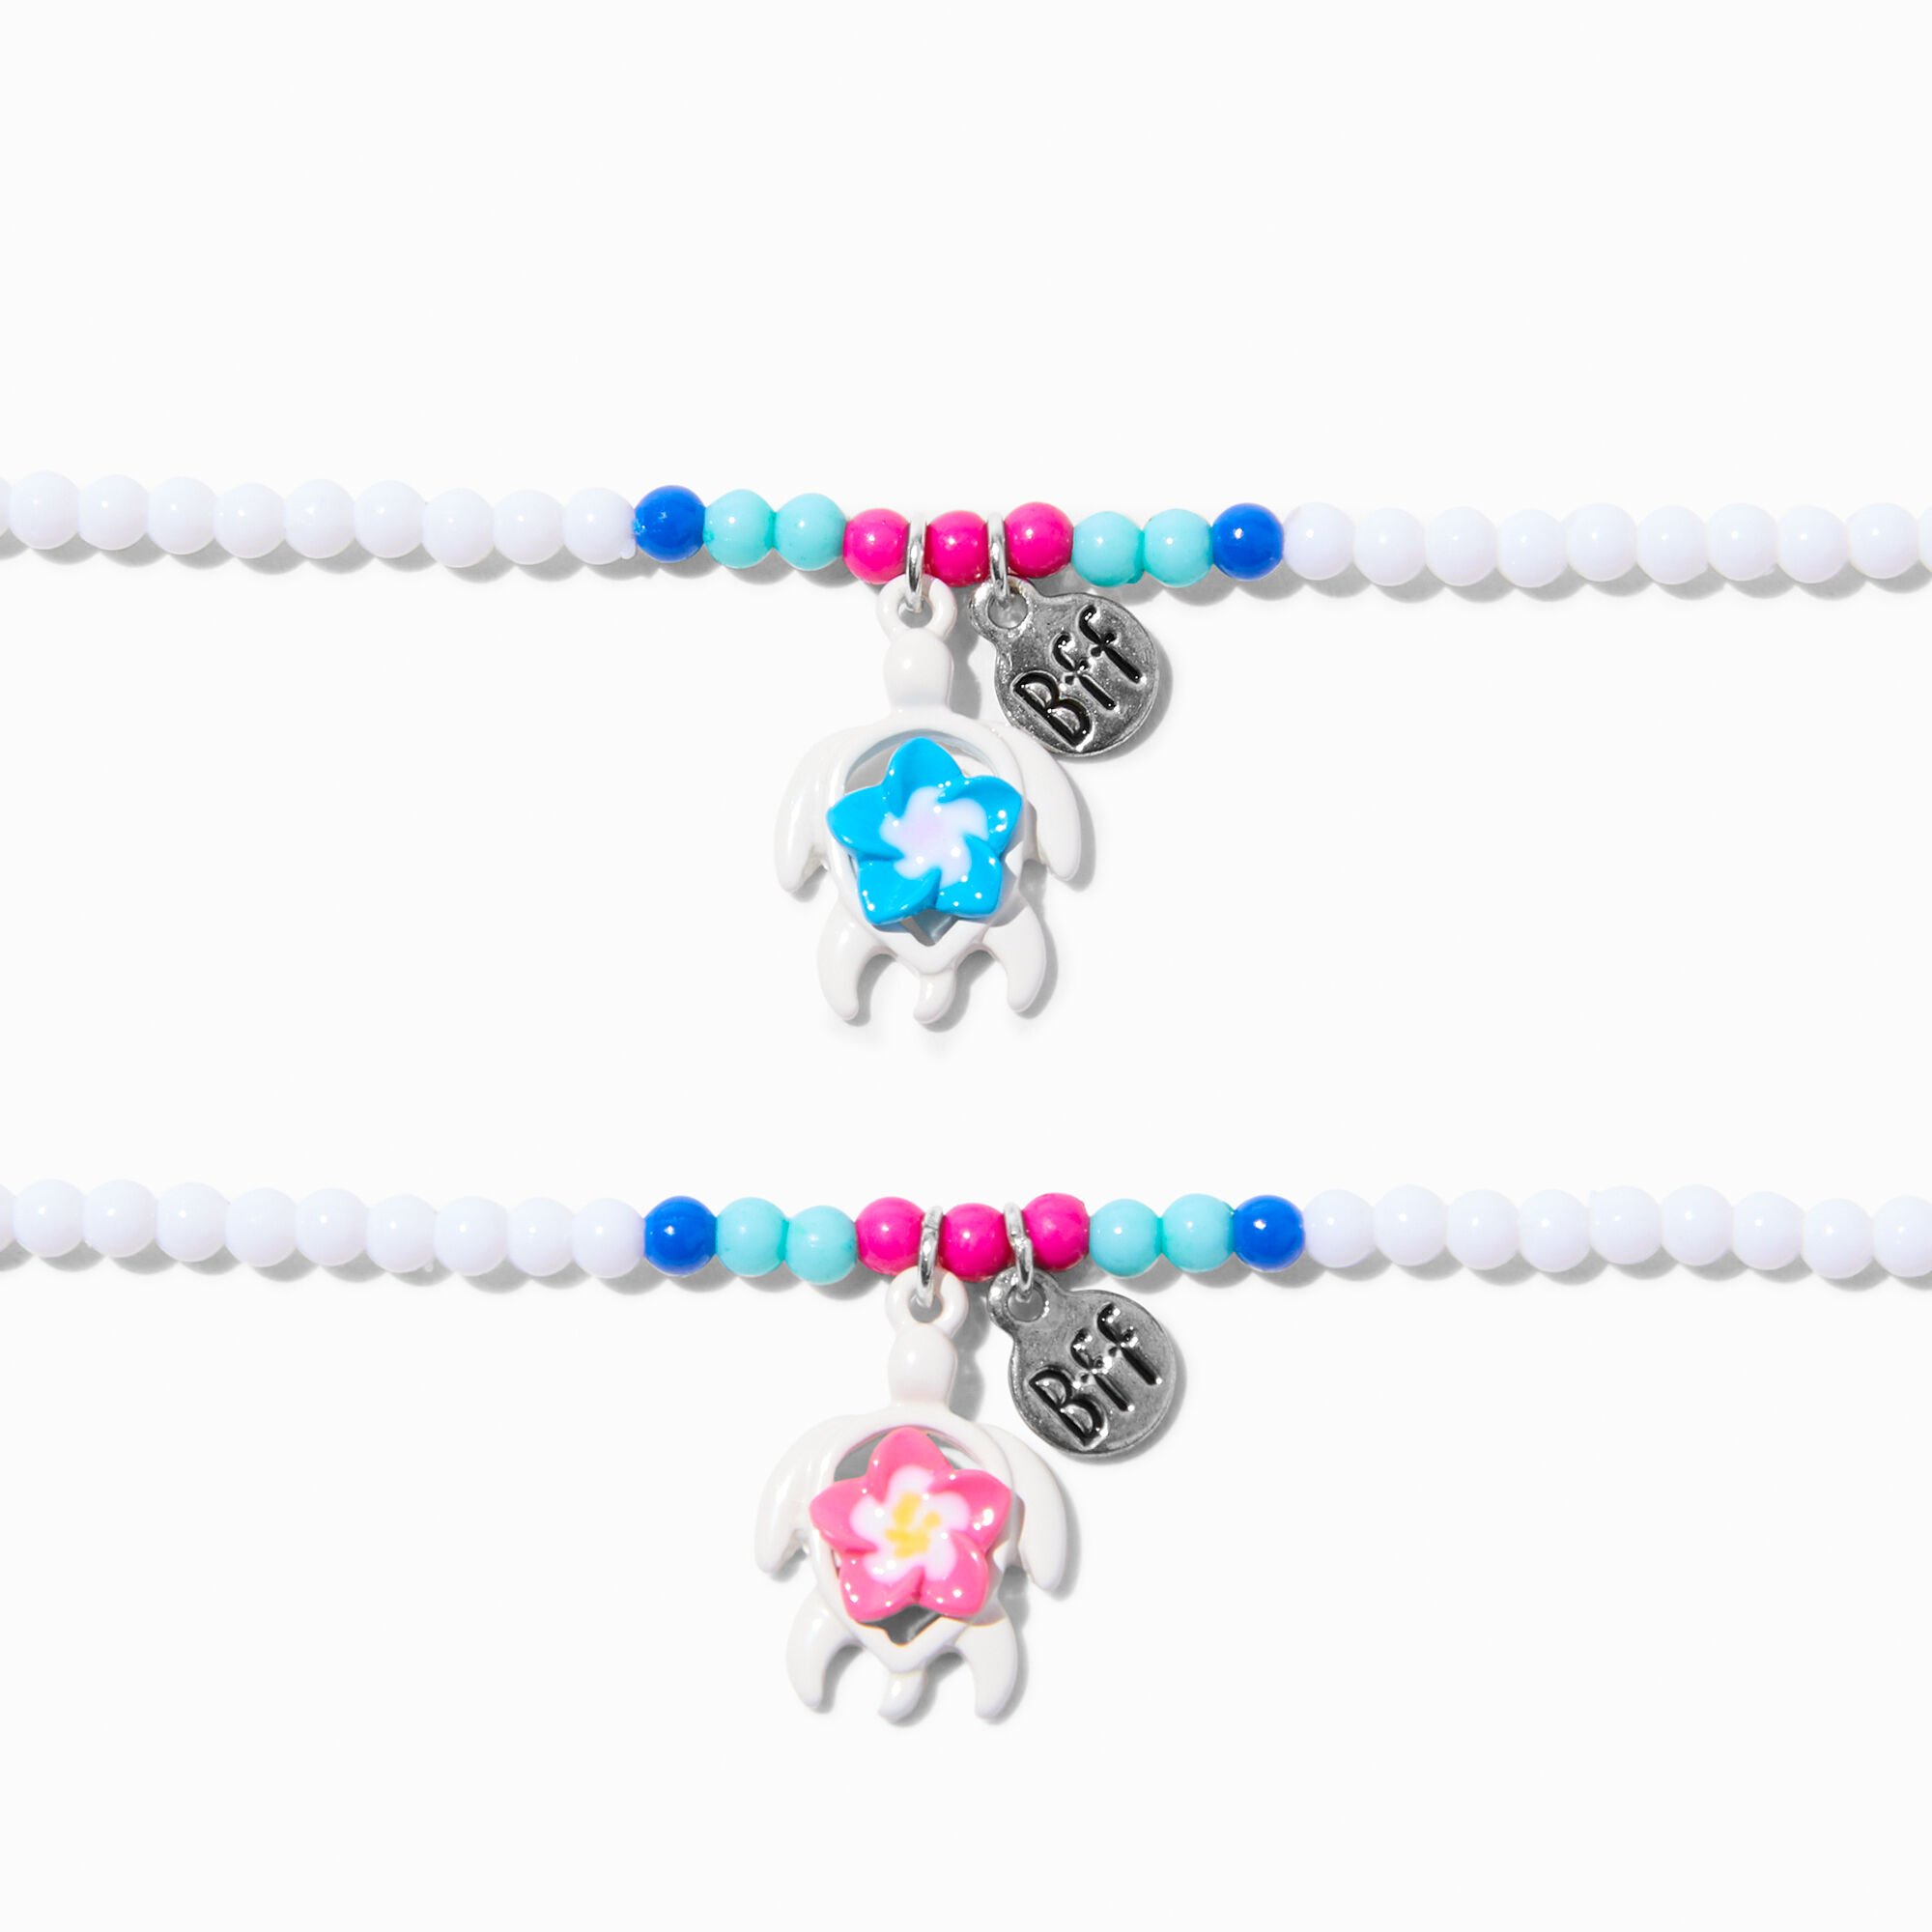 View Claires Best Friends Hibiscus Turtle Bff Beaded Choker Necklaces 2 Pack Silver information